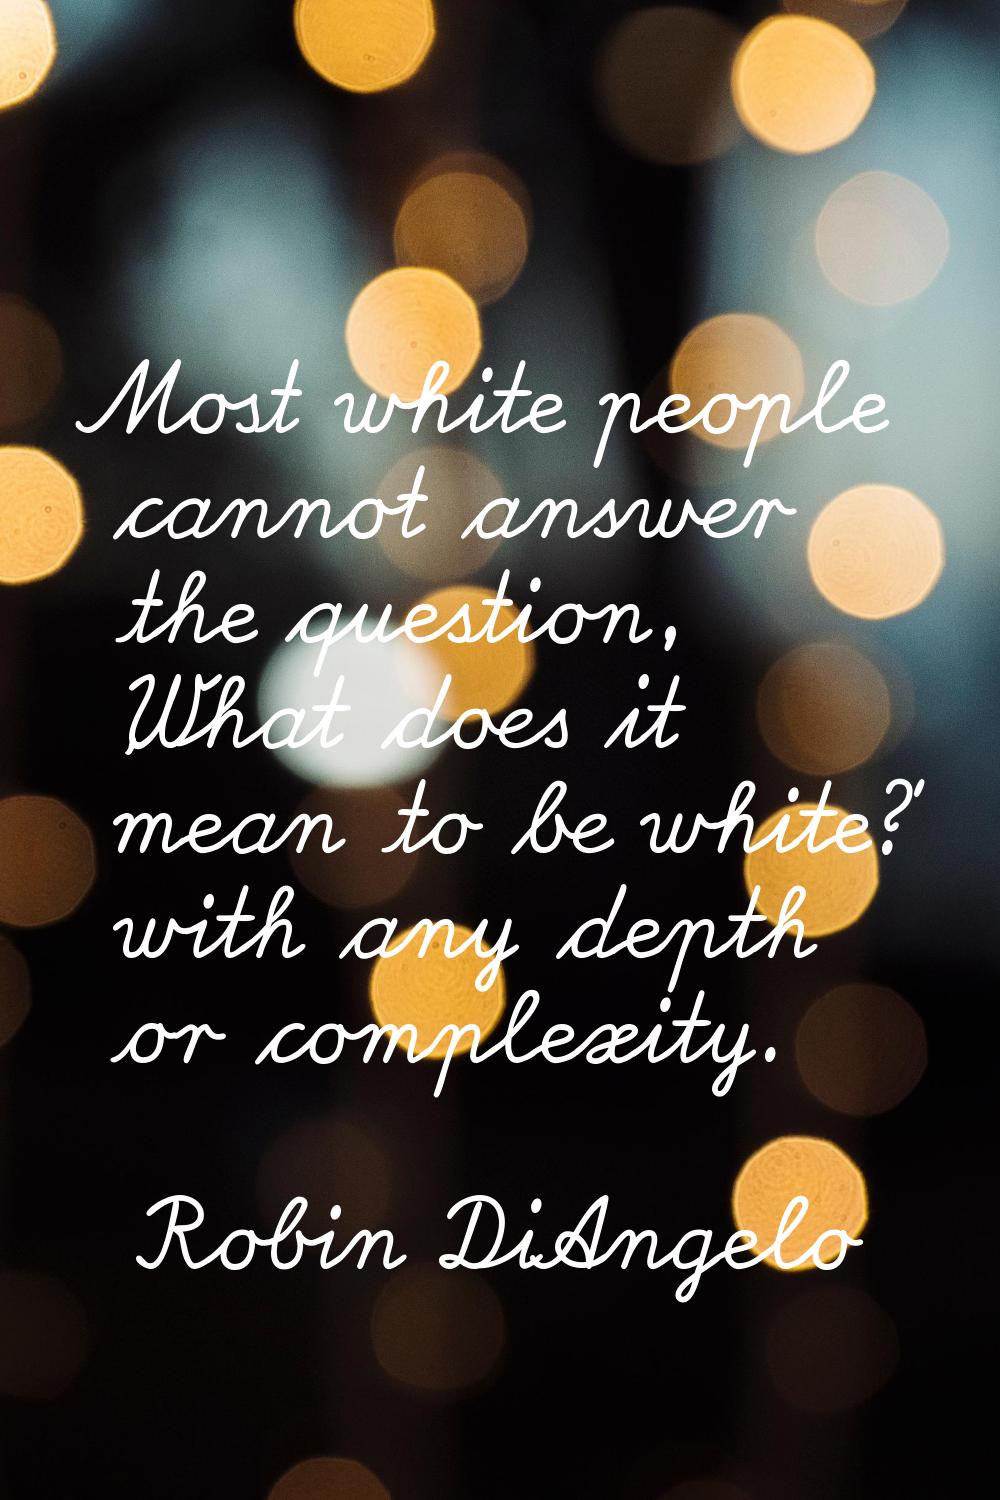 Most white people cannot answer the question, 'What does it mean to be white?' with any depth or co